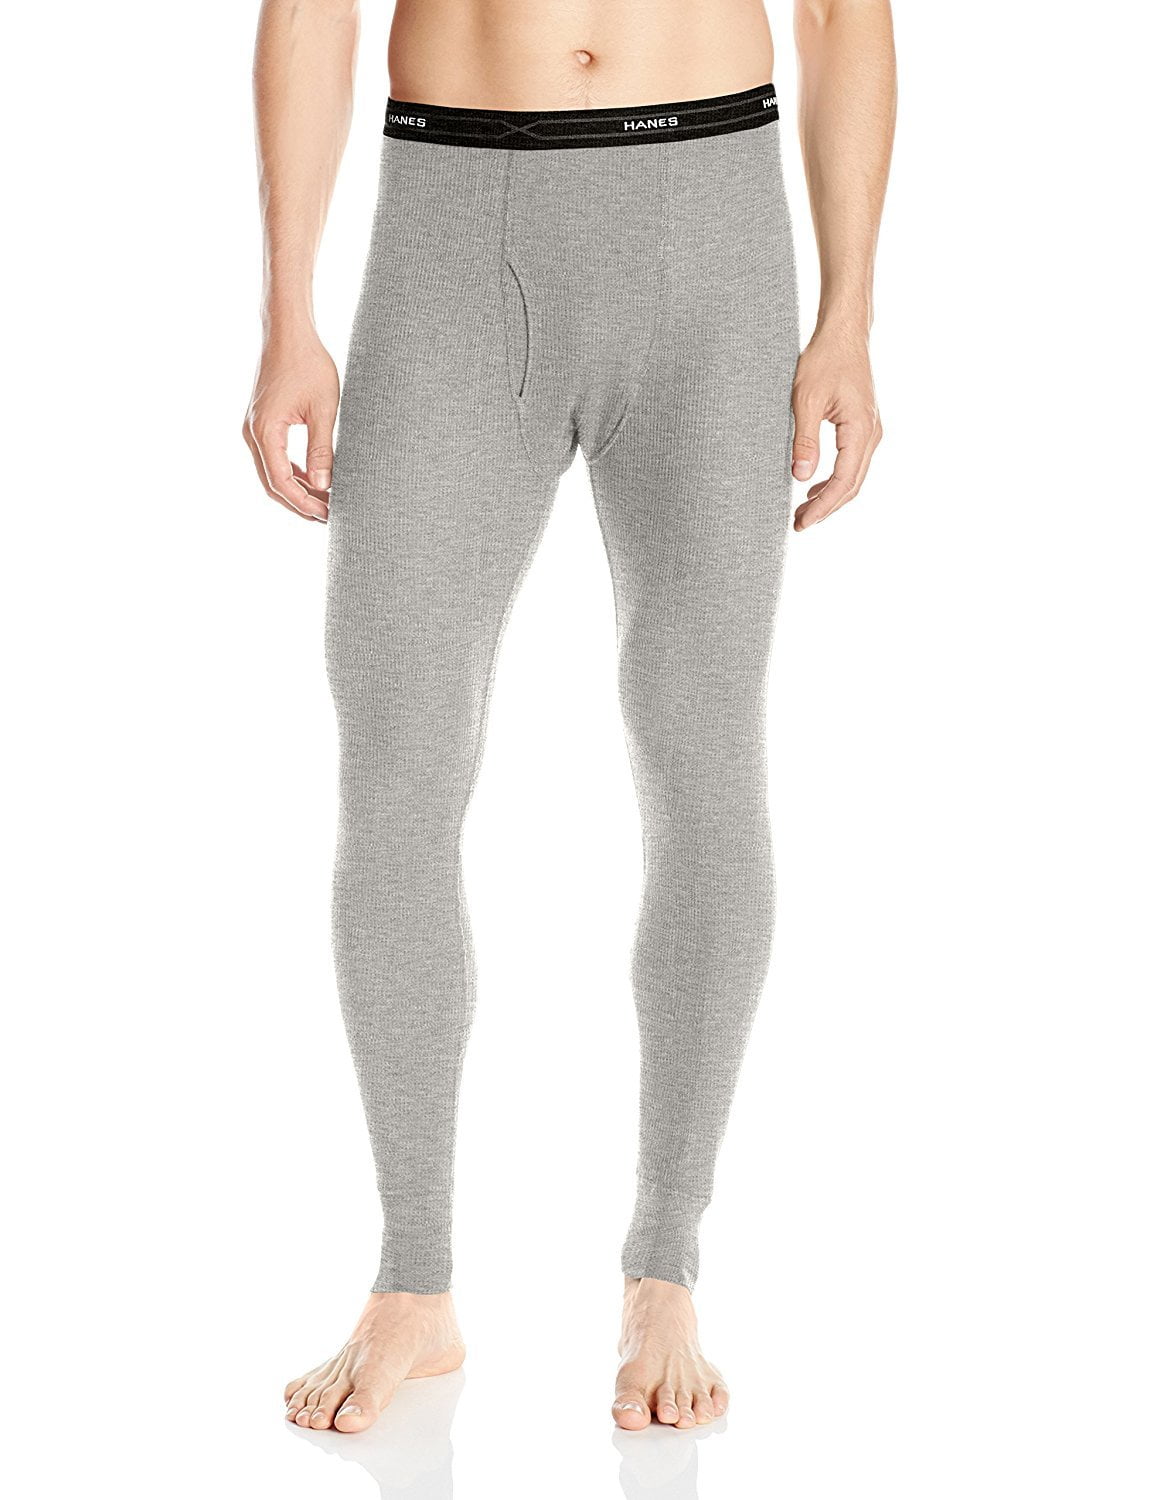 Hanes Men's Big Red Label X-Temp Thermal Pant, Heather Grey, XX-Large ...